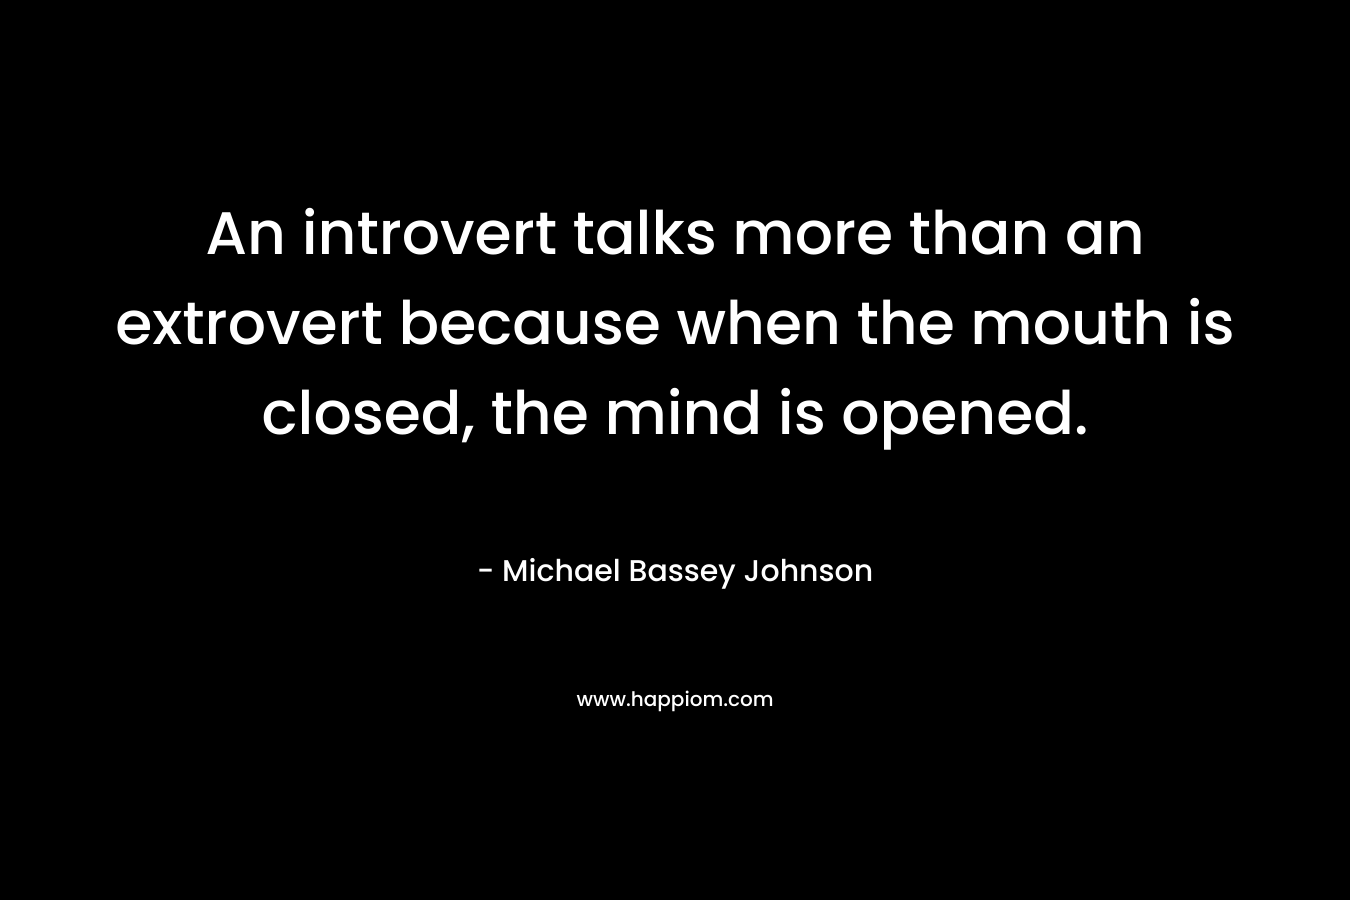 An introvert talks more than an extrovert because when the mouth is closed, the mind is opened.